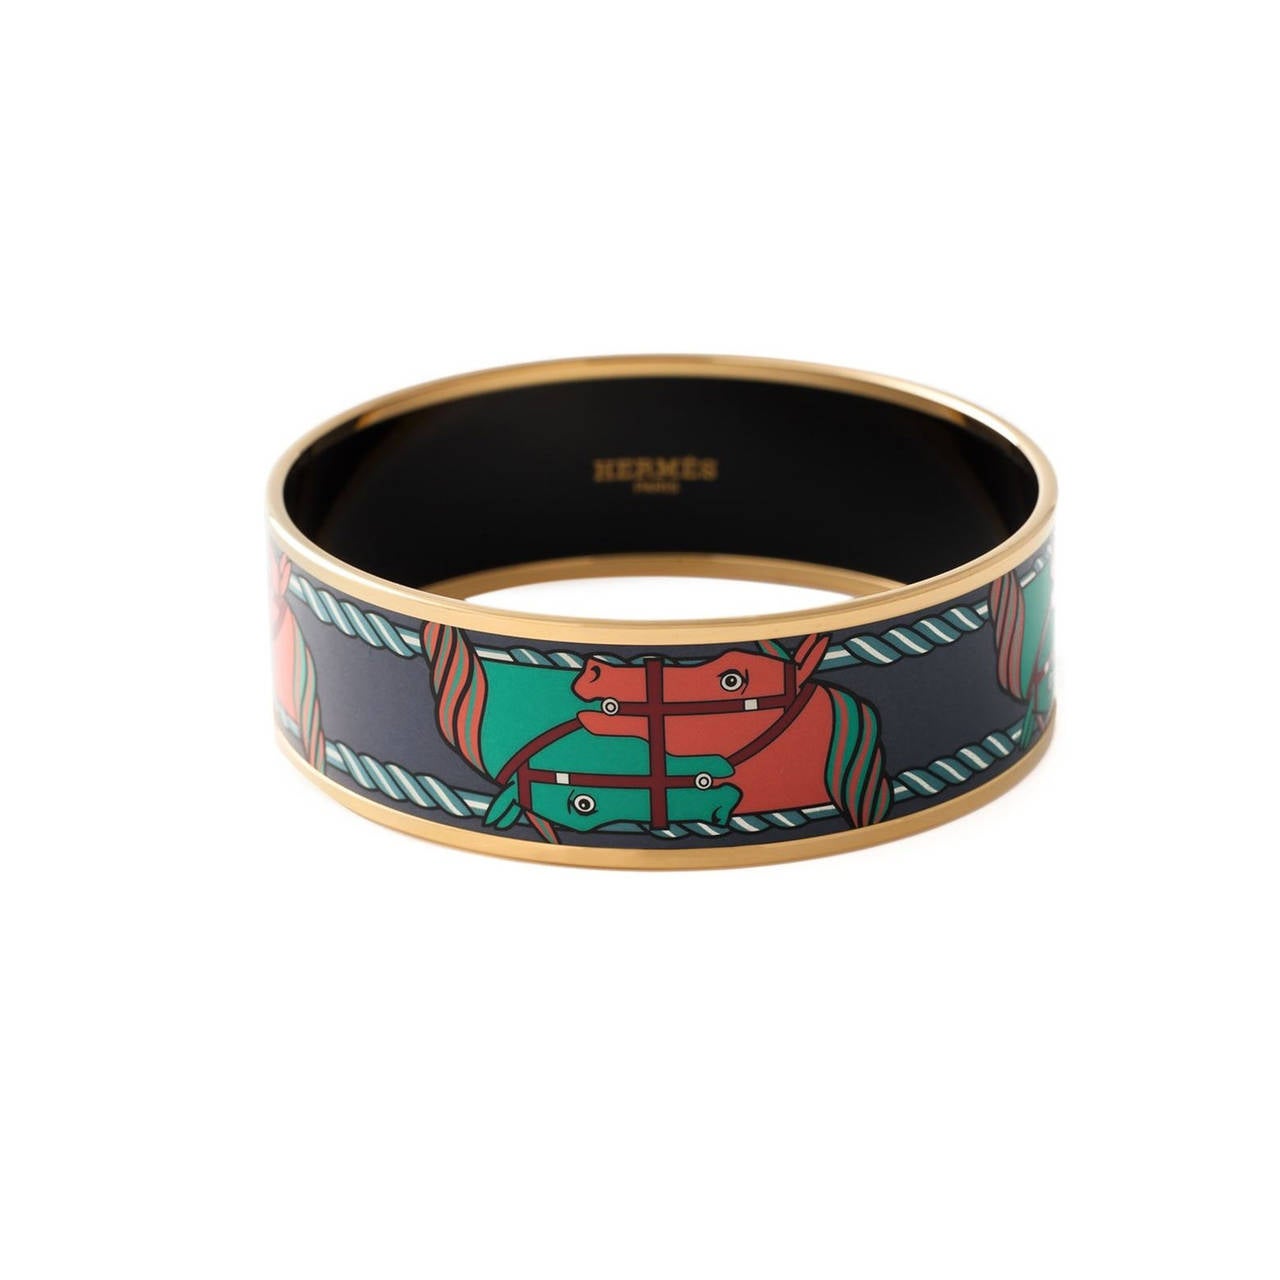 Multicoloured horse bangle from Hermès features enamel details, an embossed internal logo stamp and a gold-tone lining.

Measurements: Circumference: 21 cm

Material: Resin, Material

Colour: Multi, Gold